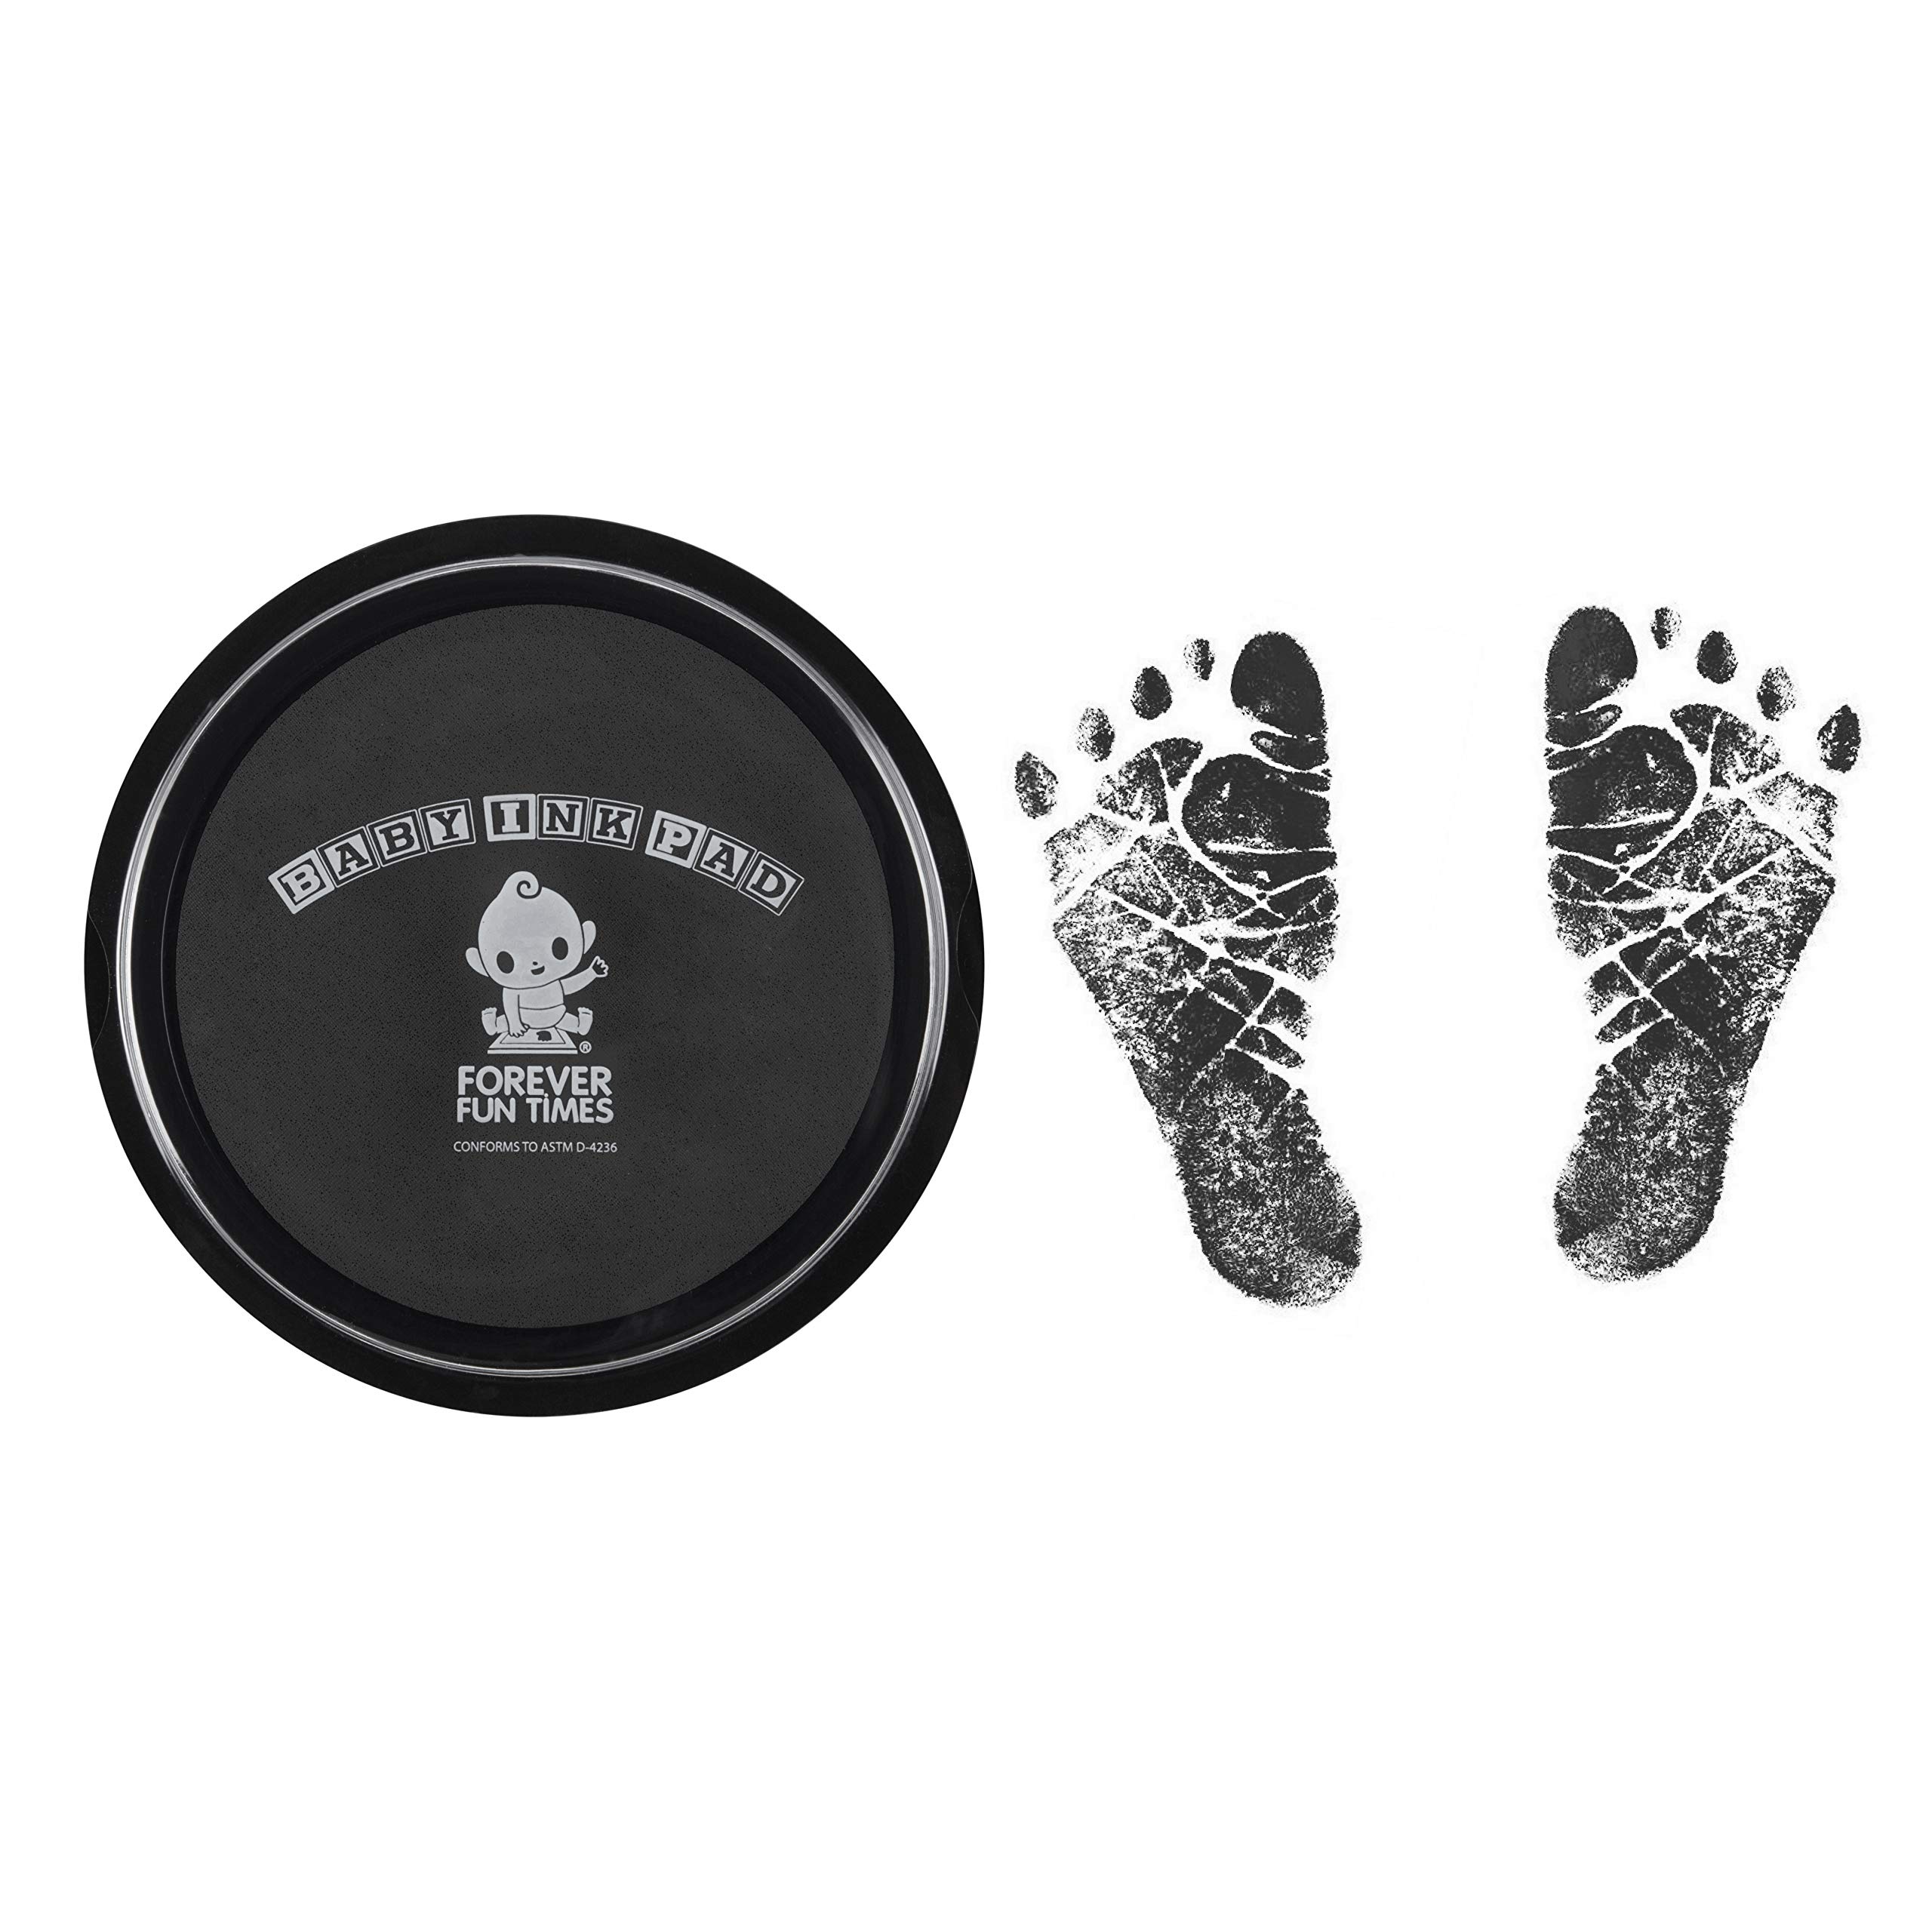 Baby Hand and Footprint Kit Get Hundreds of Detailed Prints With